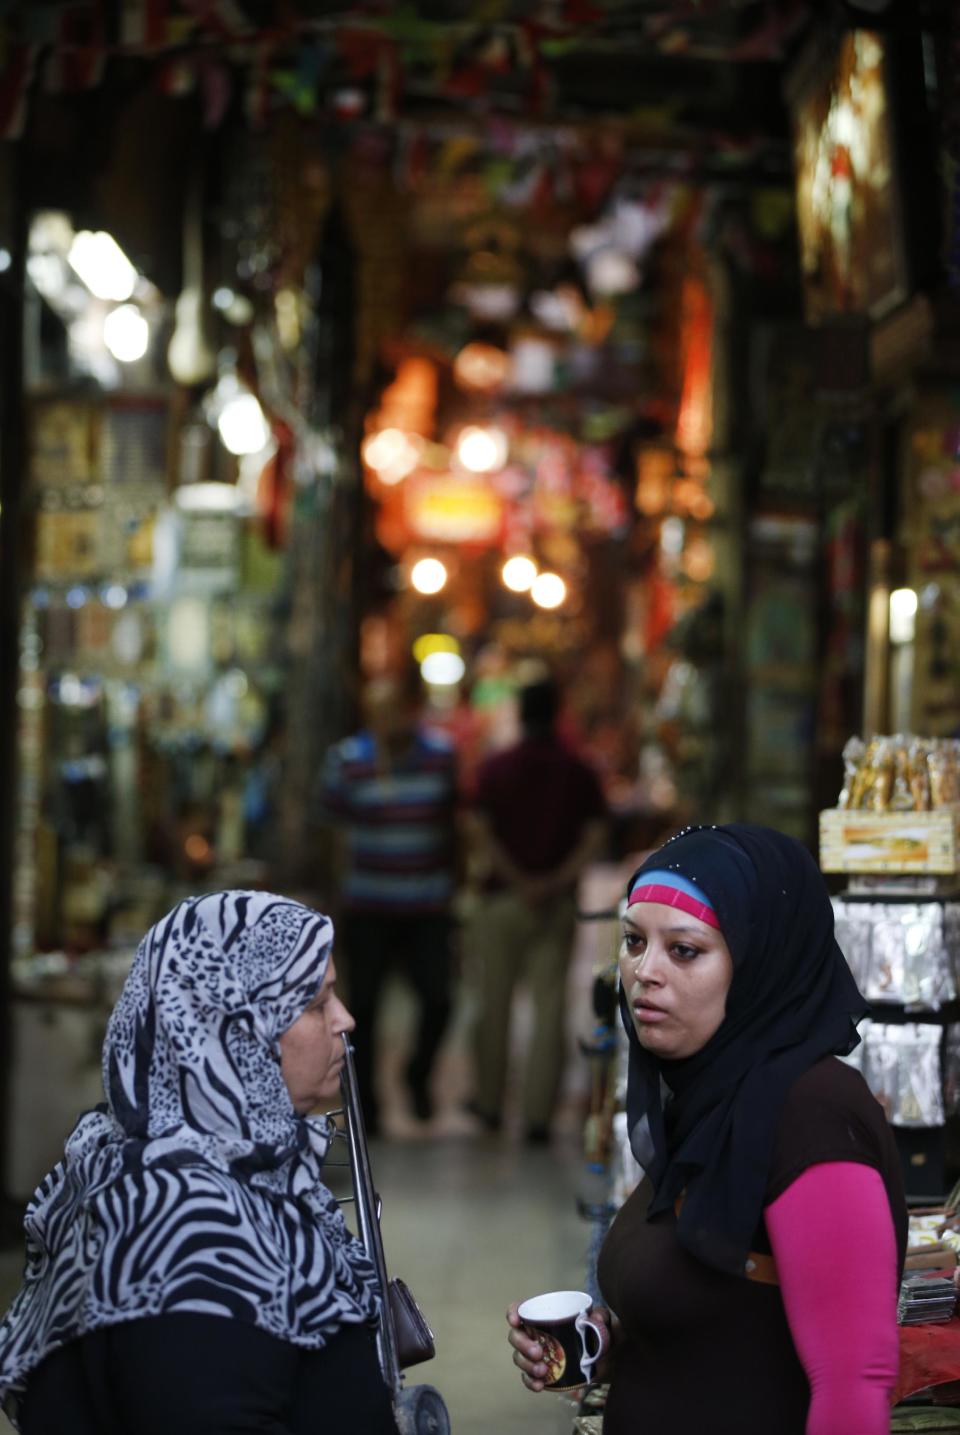 Egyptian vendors talk in the Khan El-Khalili market, normally a popular tourist destination, in Cairo, Egypt, Monday, Sept. 9, 2013. Before the 2011 revolution that started Egypt's political roller coaster, sites like the pyramids were often overcrowded with visitors and vendors, but after a summer of coup, protests and massacres, most tourist attractions are virtually deserted to the point of being serene. (AP Photo/Lefteris Pitarakis)